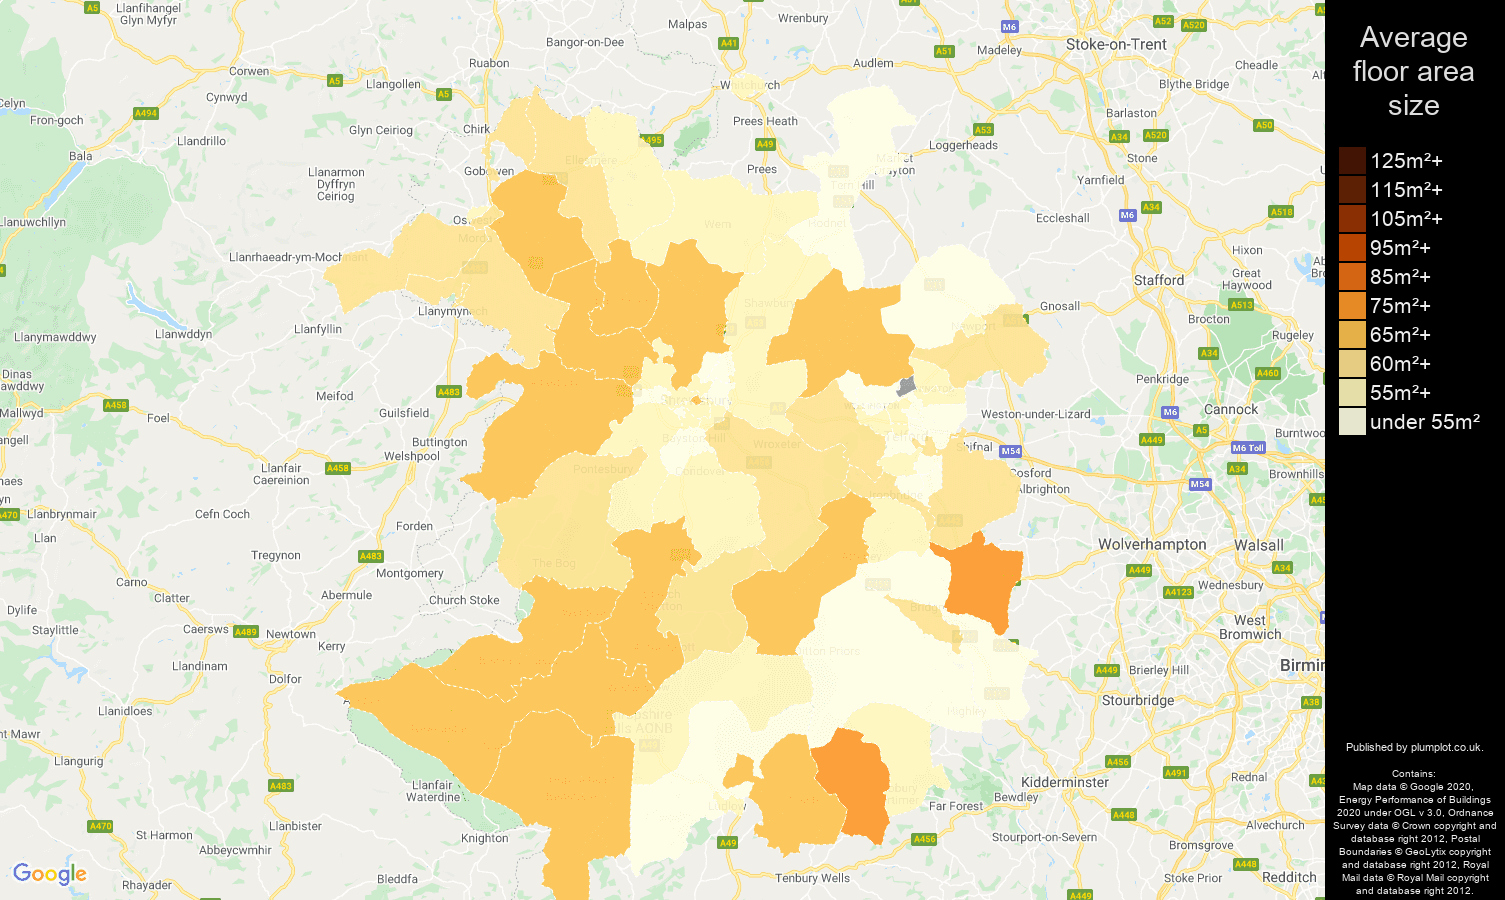 Shropshire map of average floor area size of flats